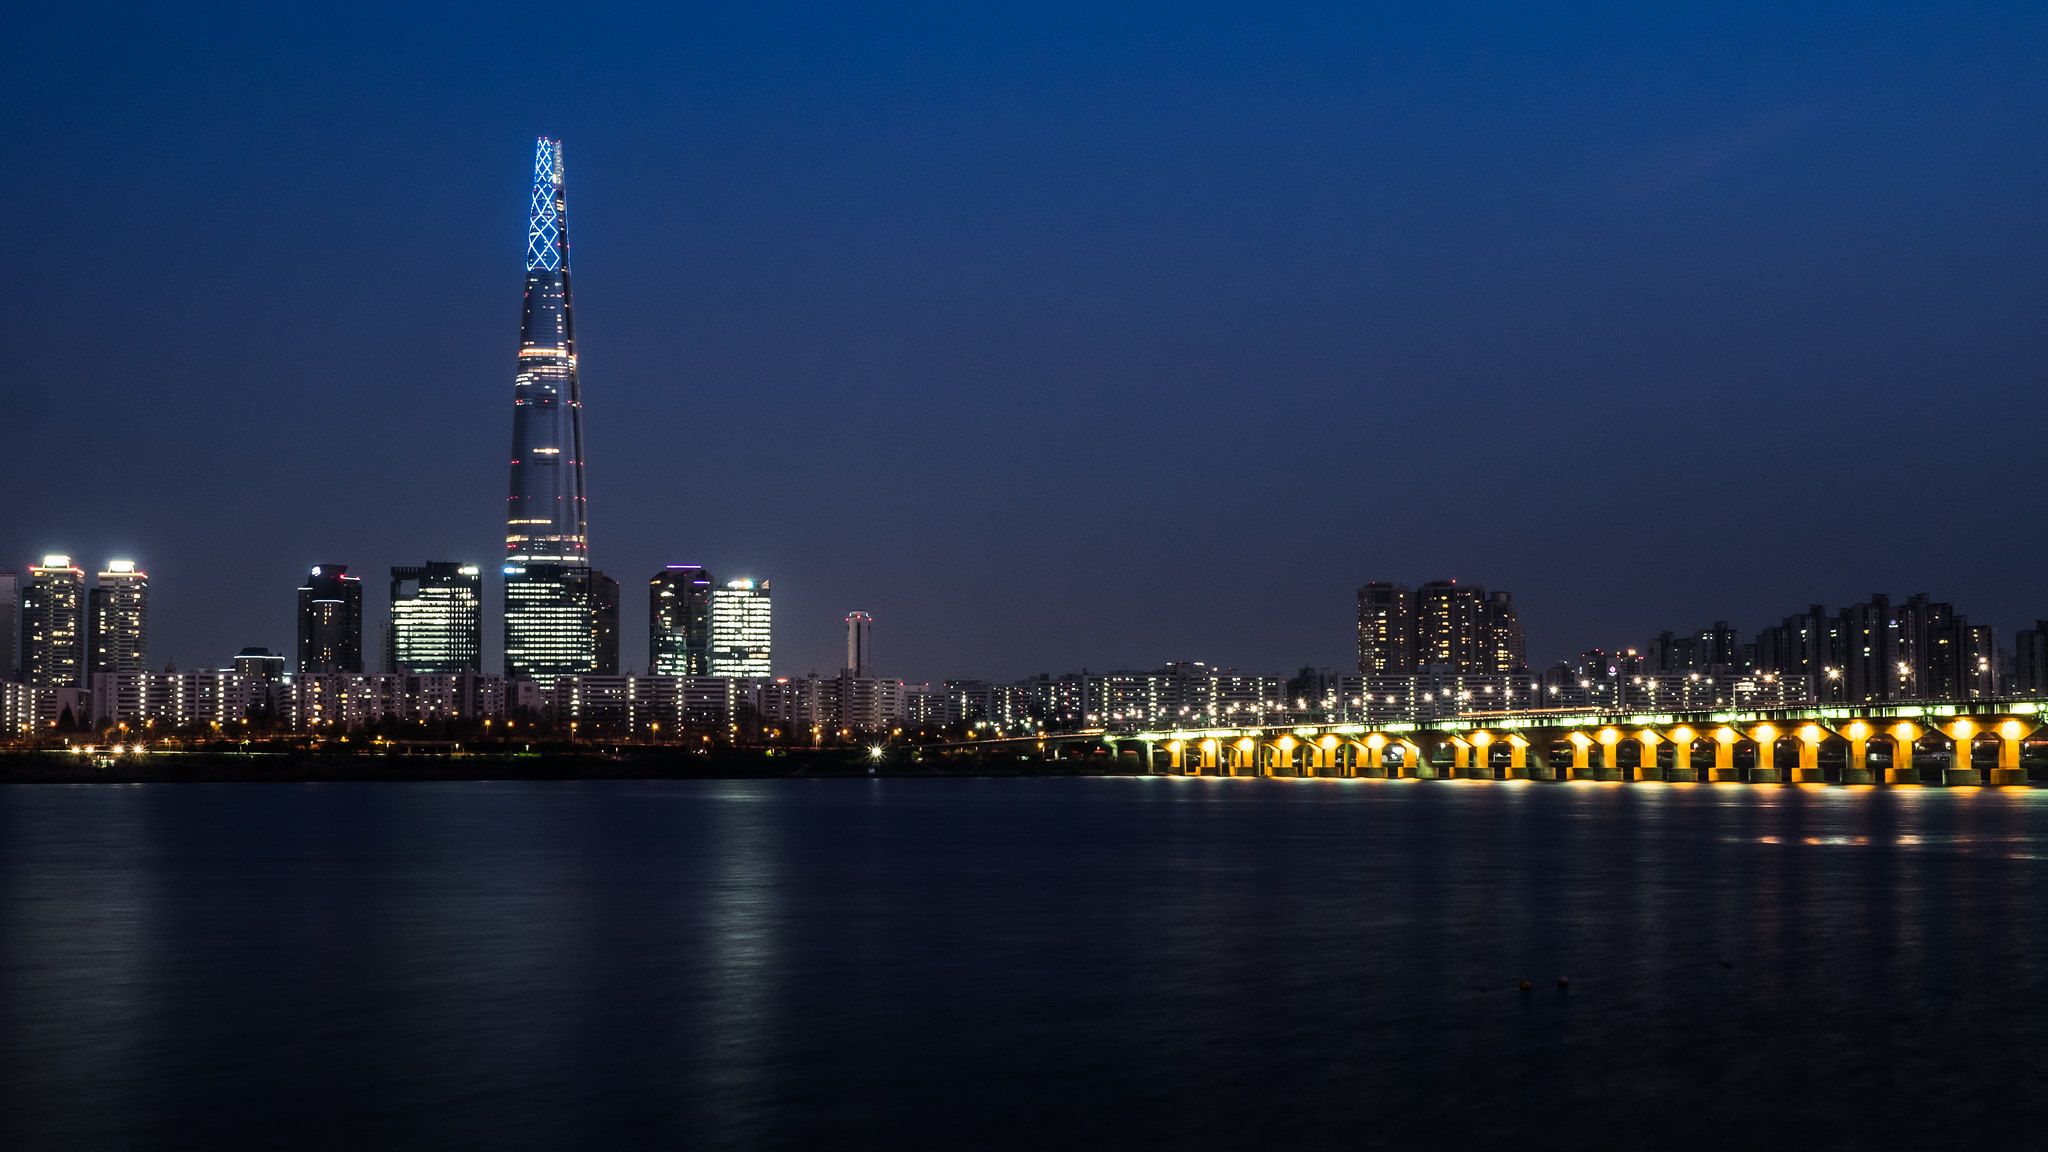 Lotte World Tower, Seoul, South Korea [2048x1152] best designs and art from the internet